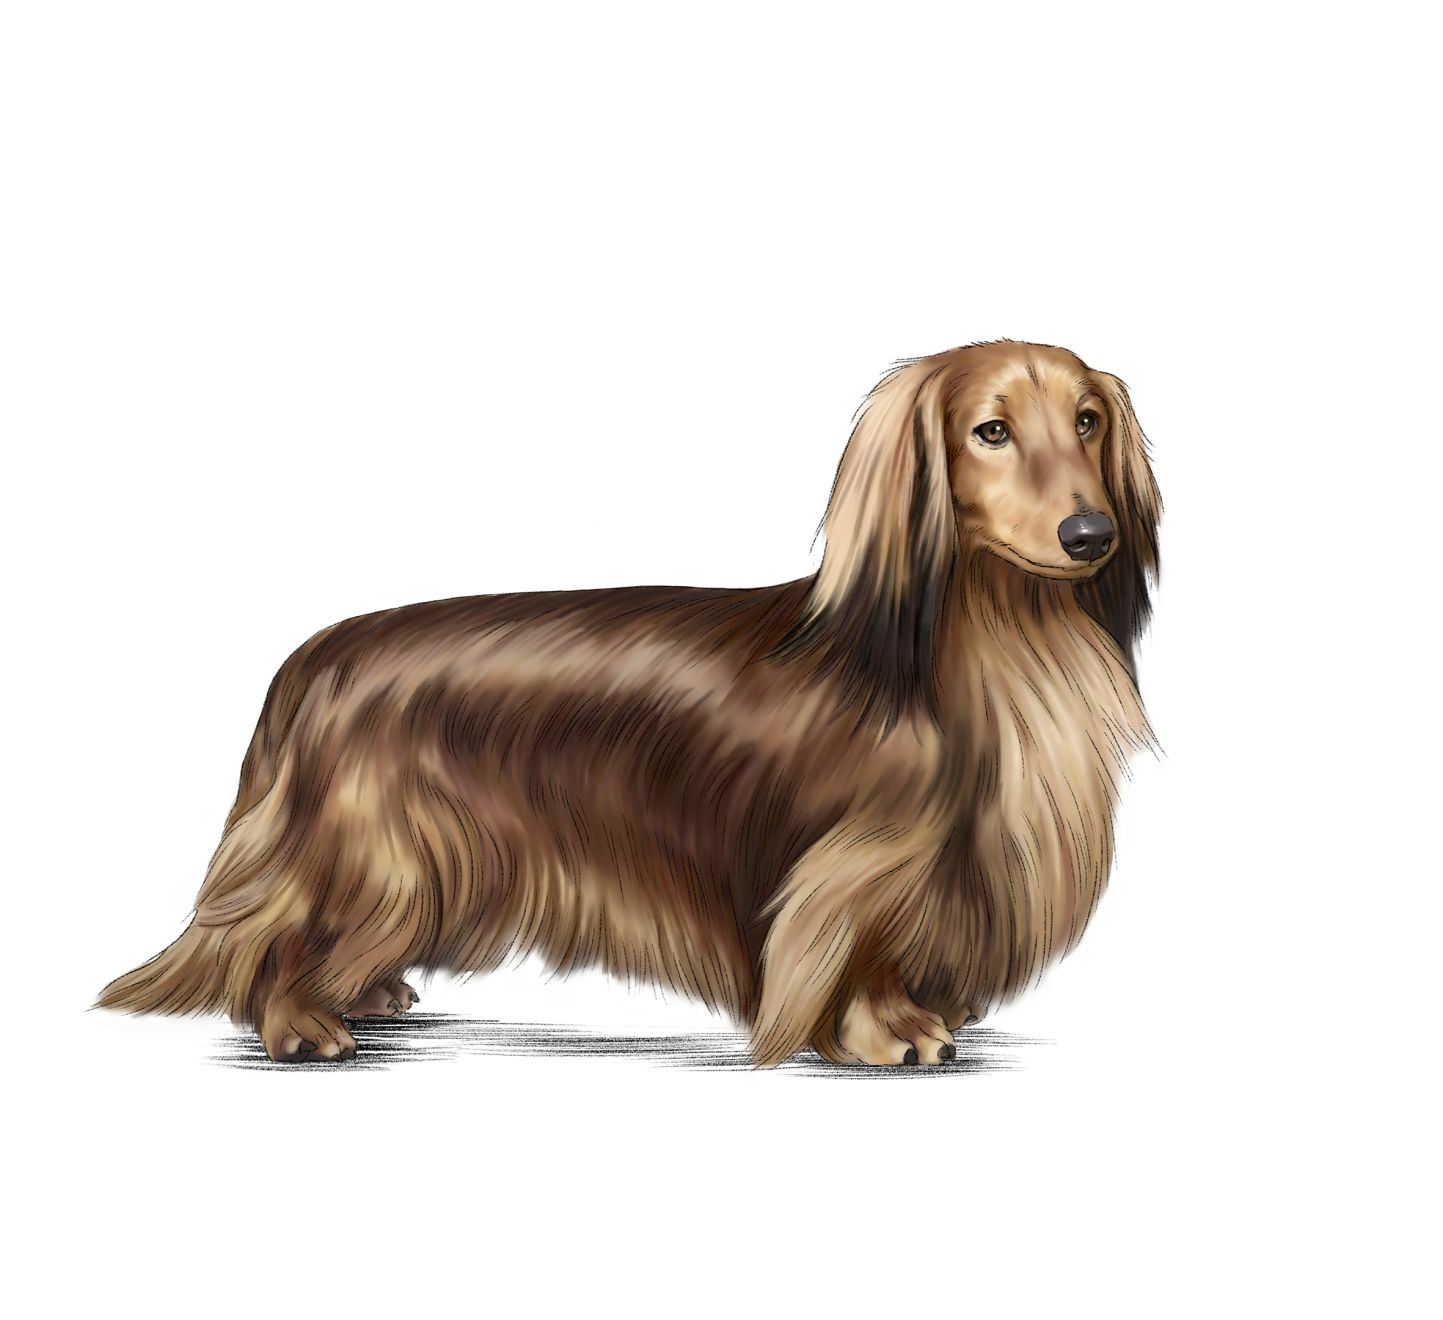 Illustration of brown and beige standard long-haired dachshund